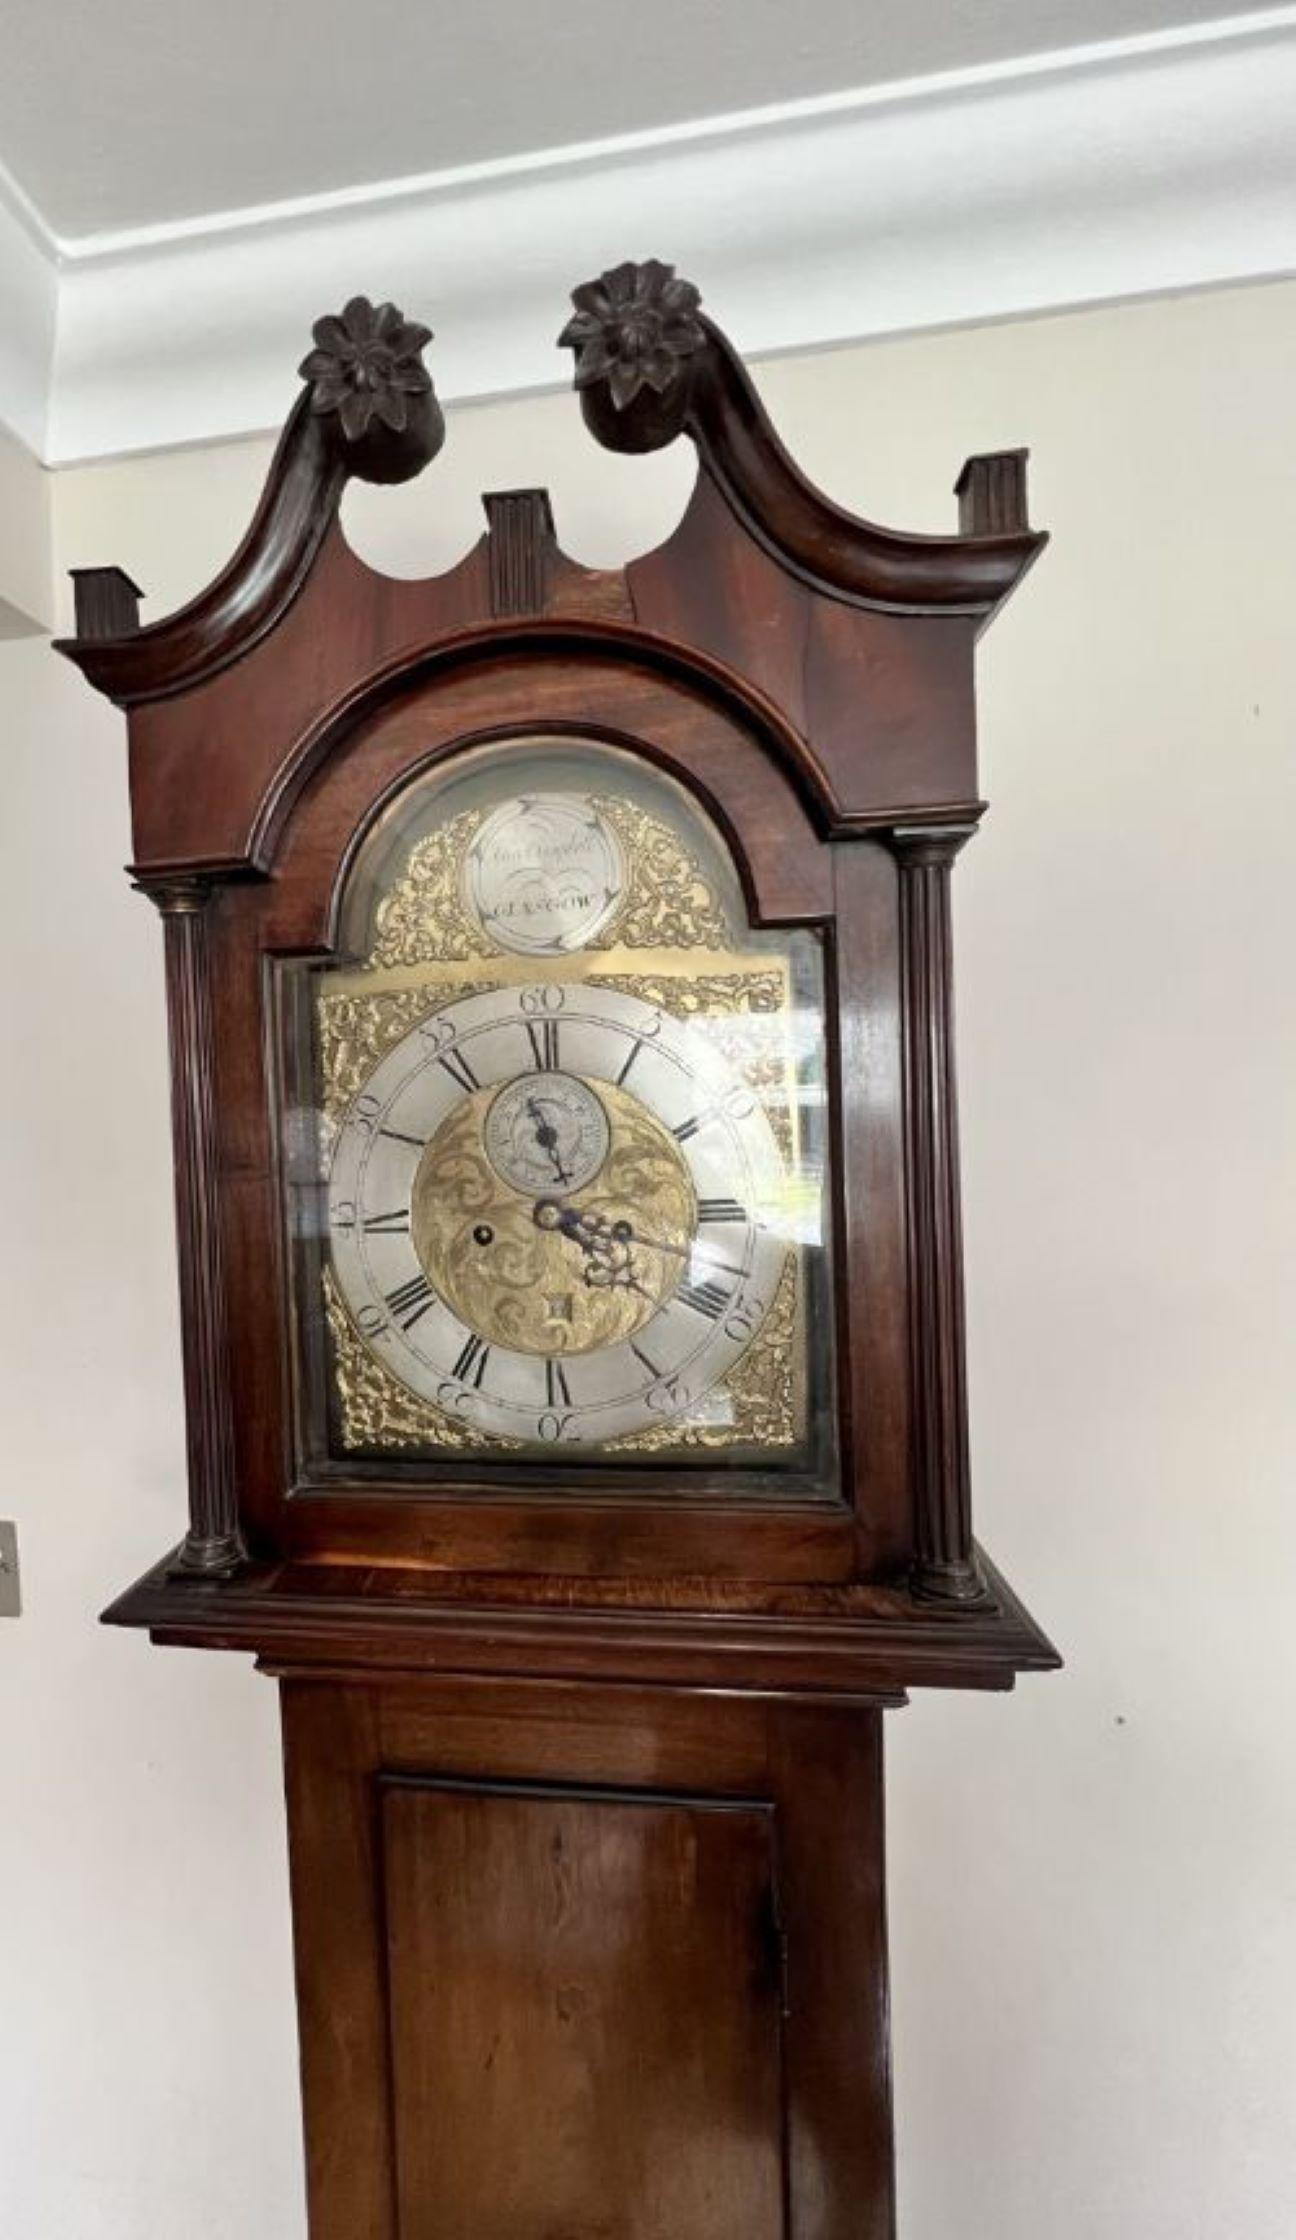 Quality antique 19th century Scottish mahogany long case clock having a brass dial with subsidiary seconds dial with date aperture, signed to the break arch John Campbell Glasgow with a wonderful mahogany case
Please note all of our clocks are